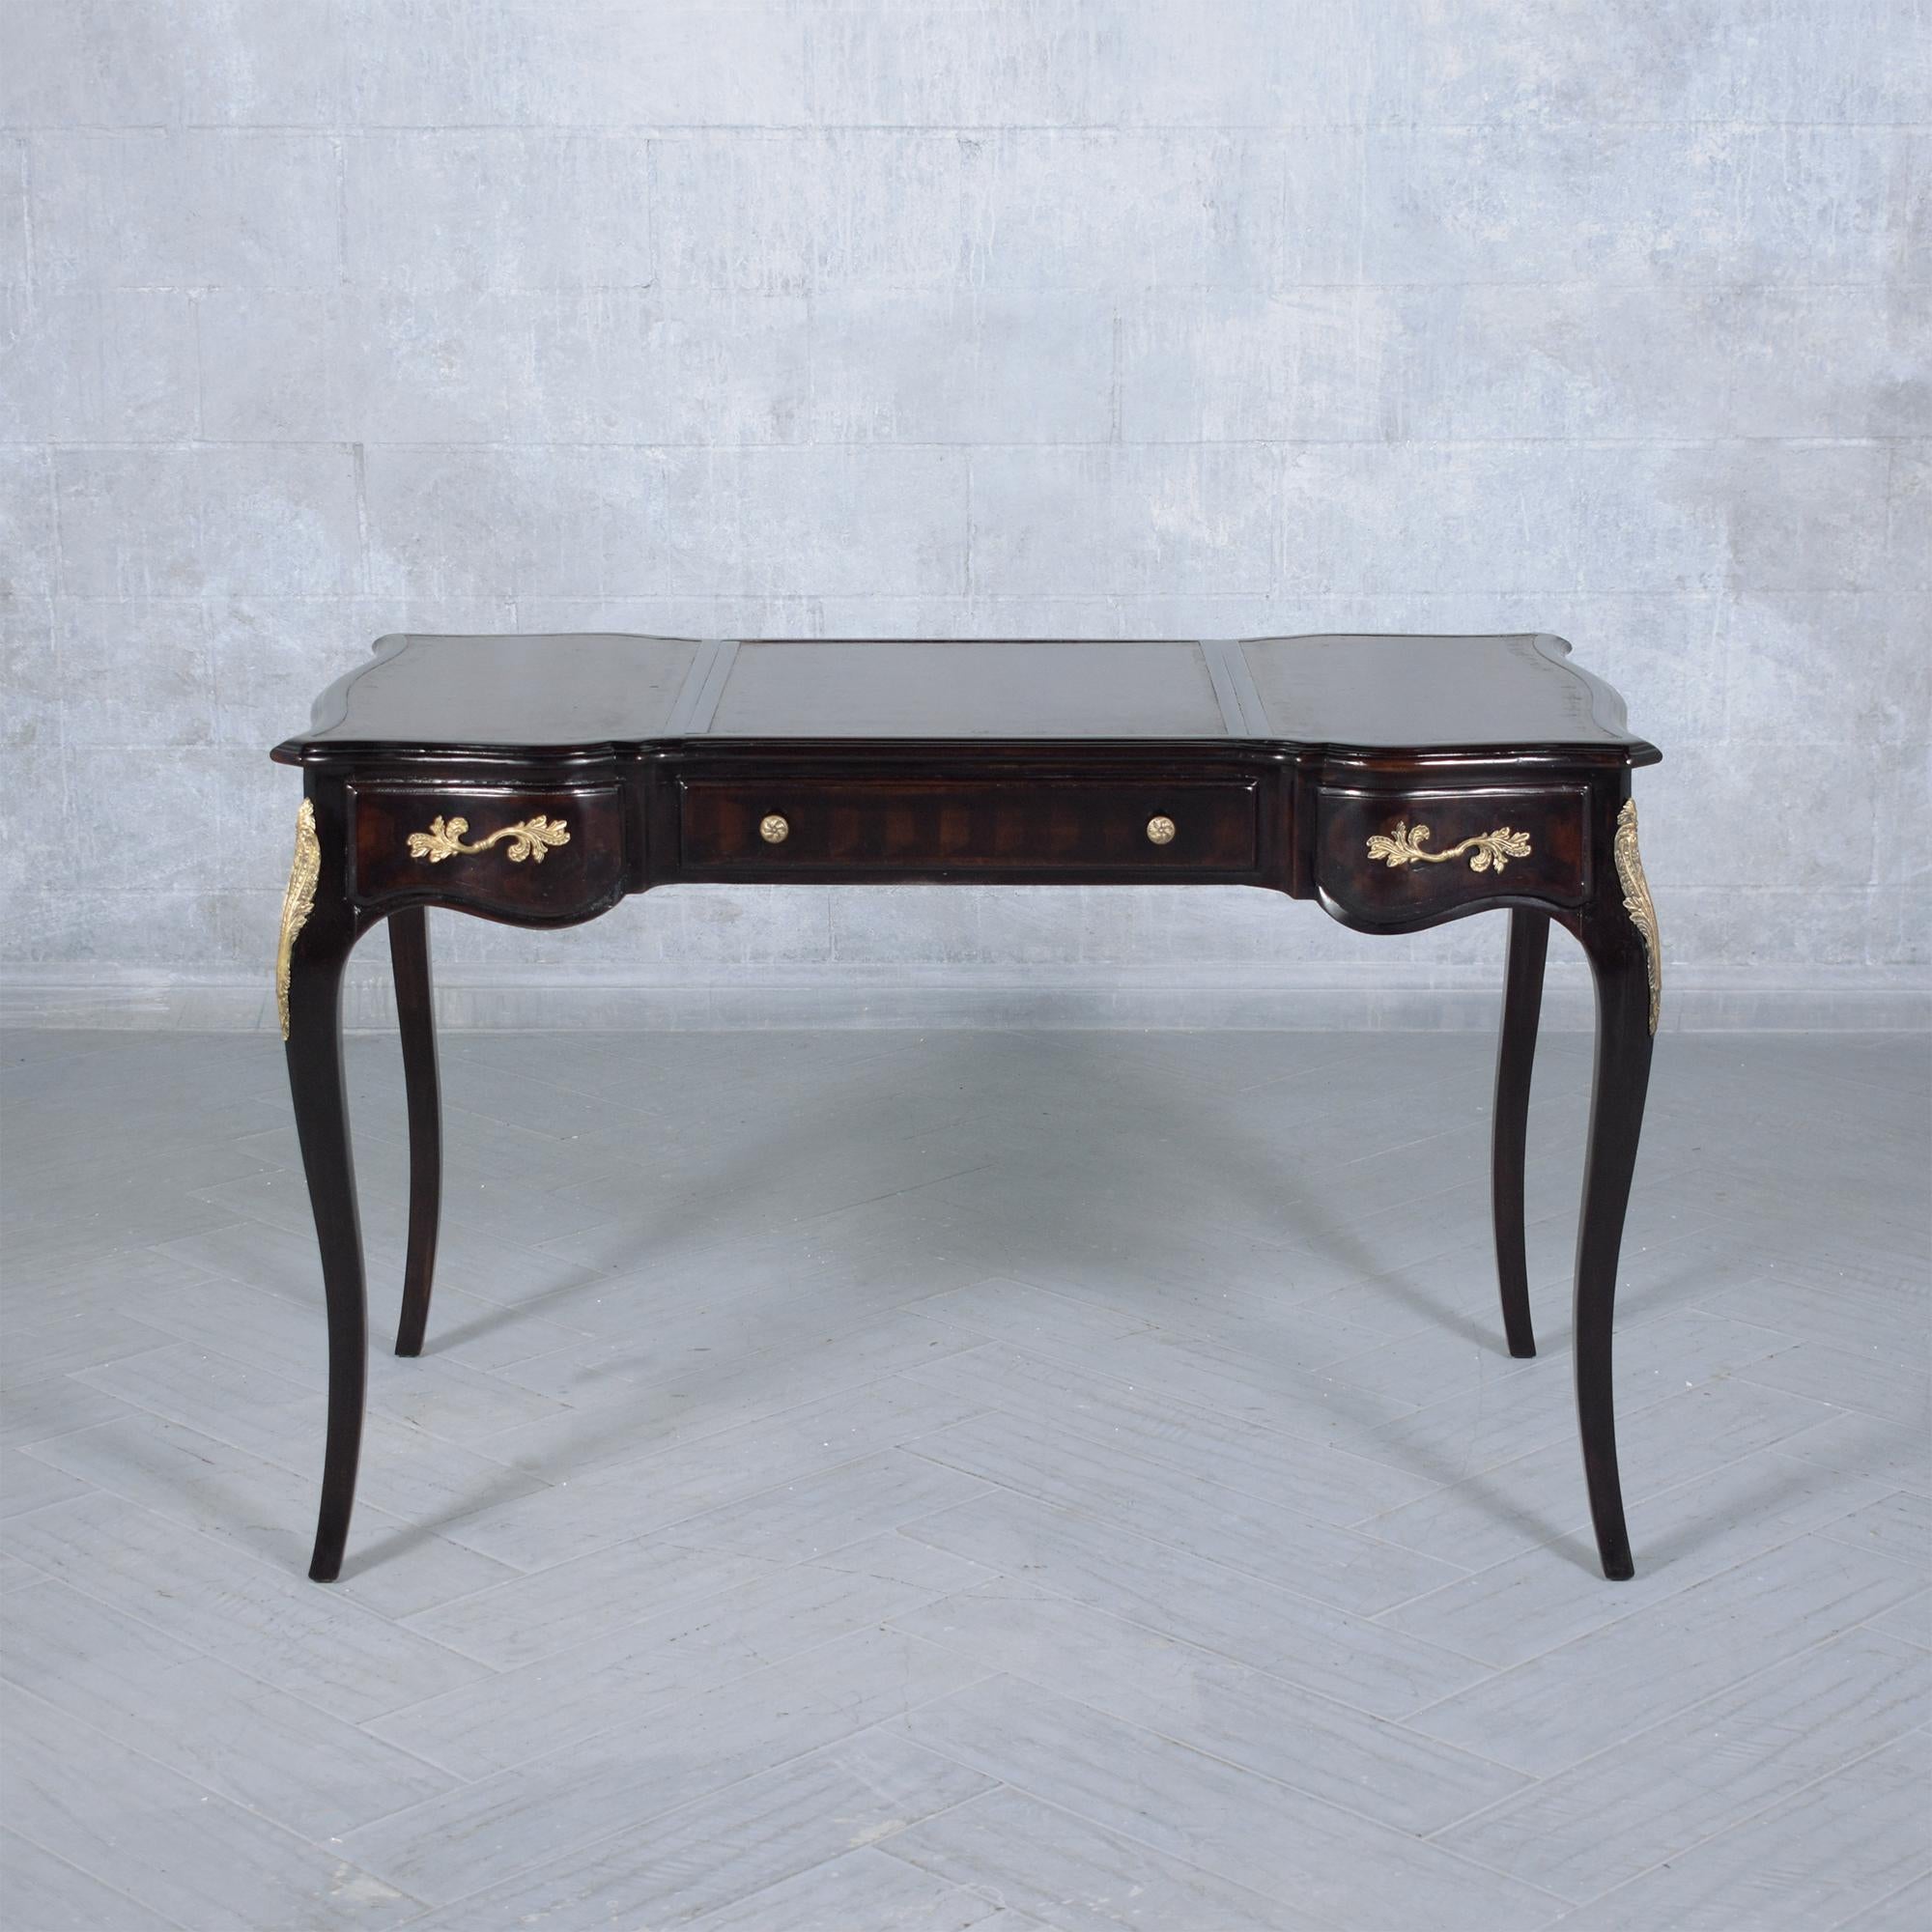 Italian Restored Louis XV-Style Mahogany Desk with Leather Writing Surface For Sale